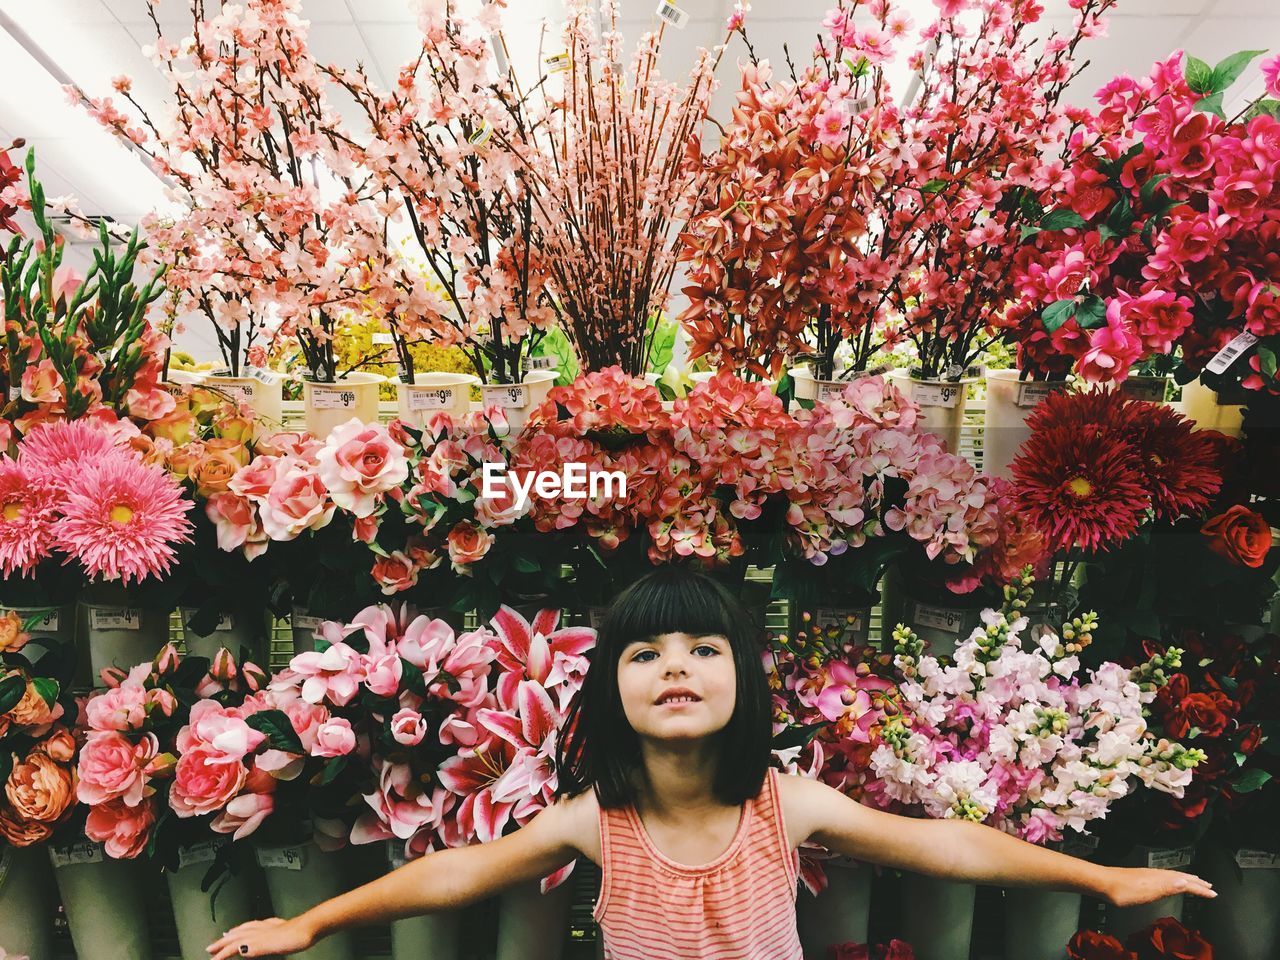 Portrait of girl with arms outstretched standing against pink flowers